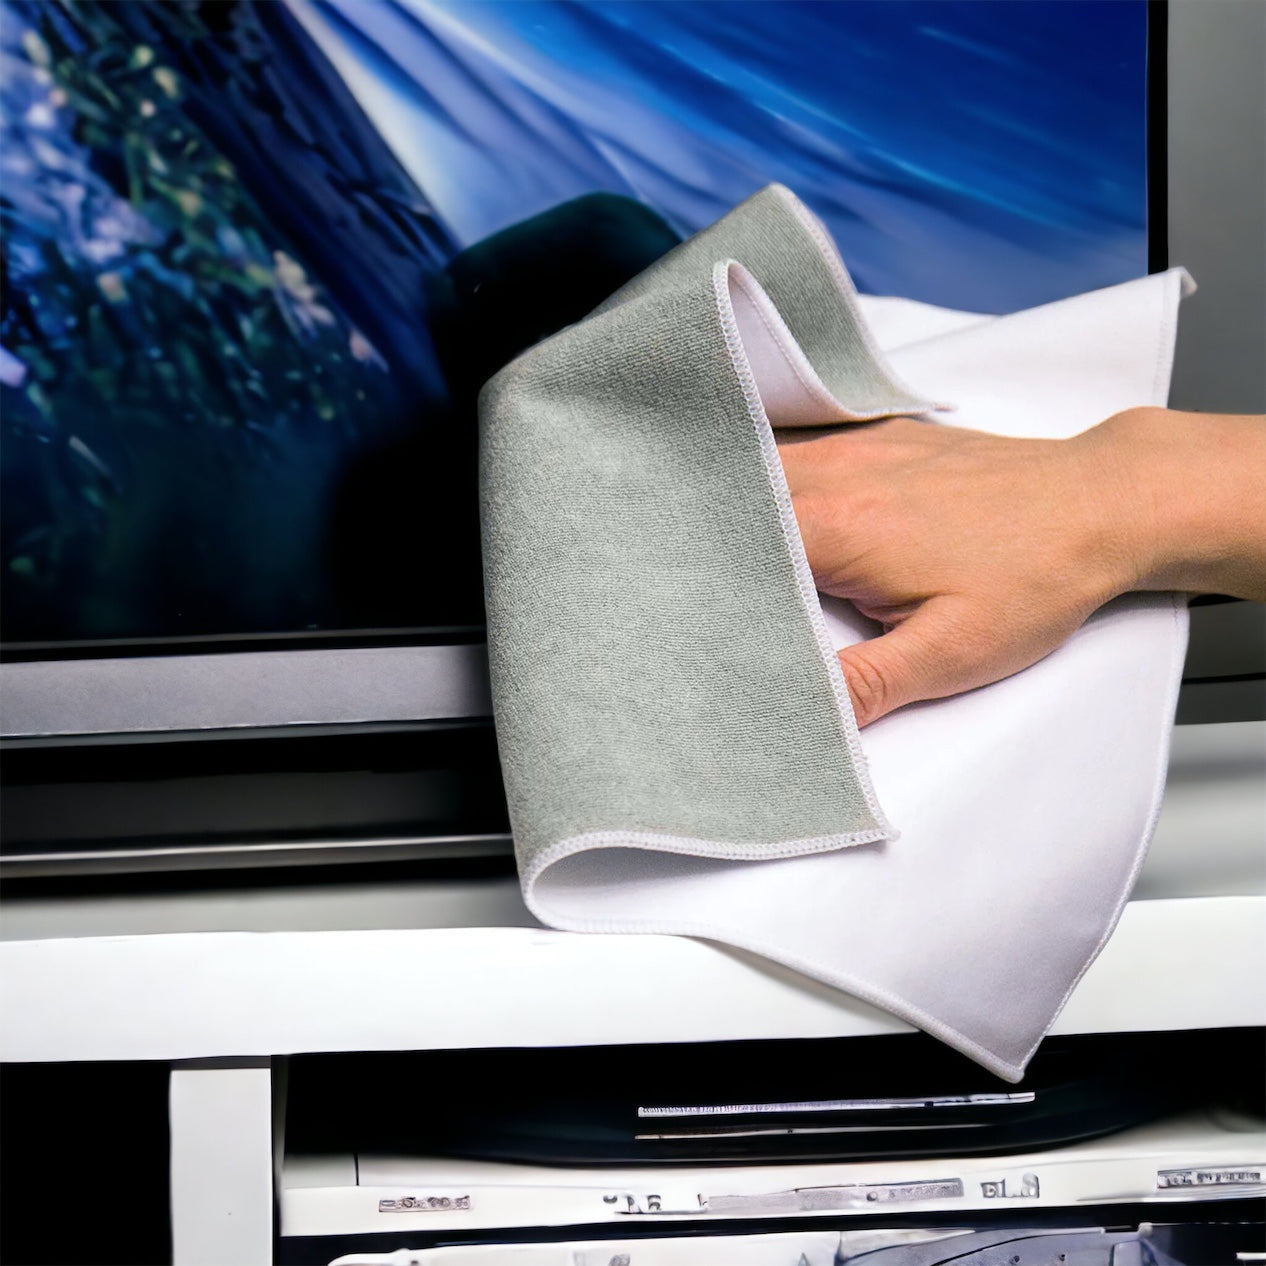 Large multipurpose white and grey microfiber cloth cleaning a television screen.